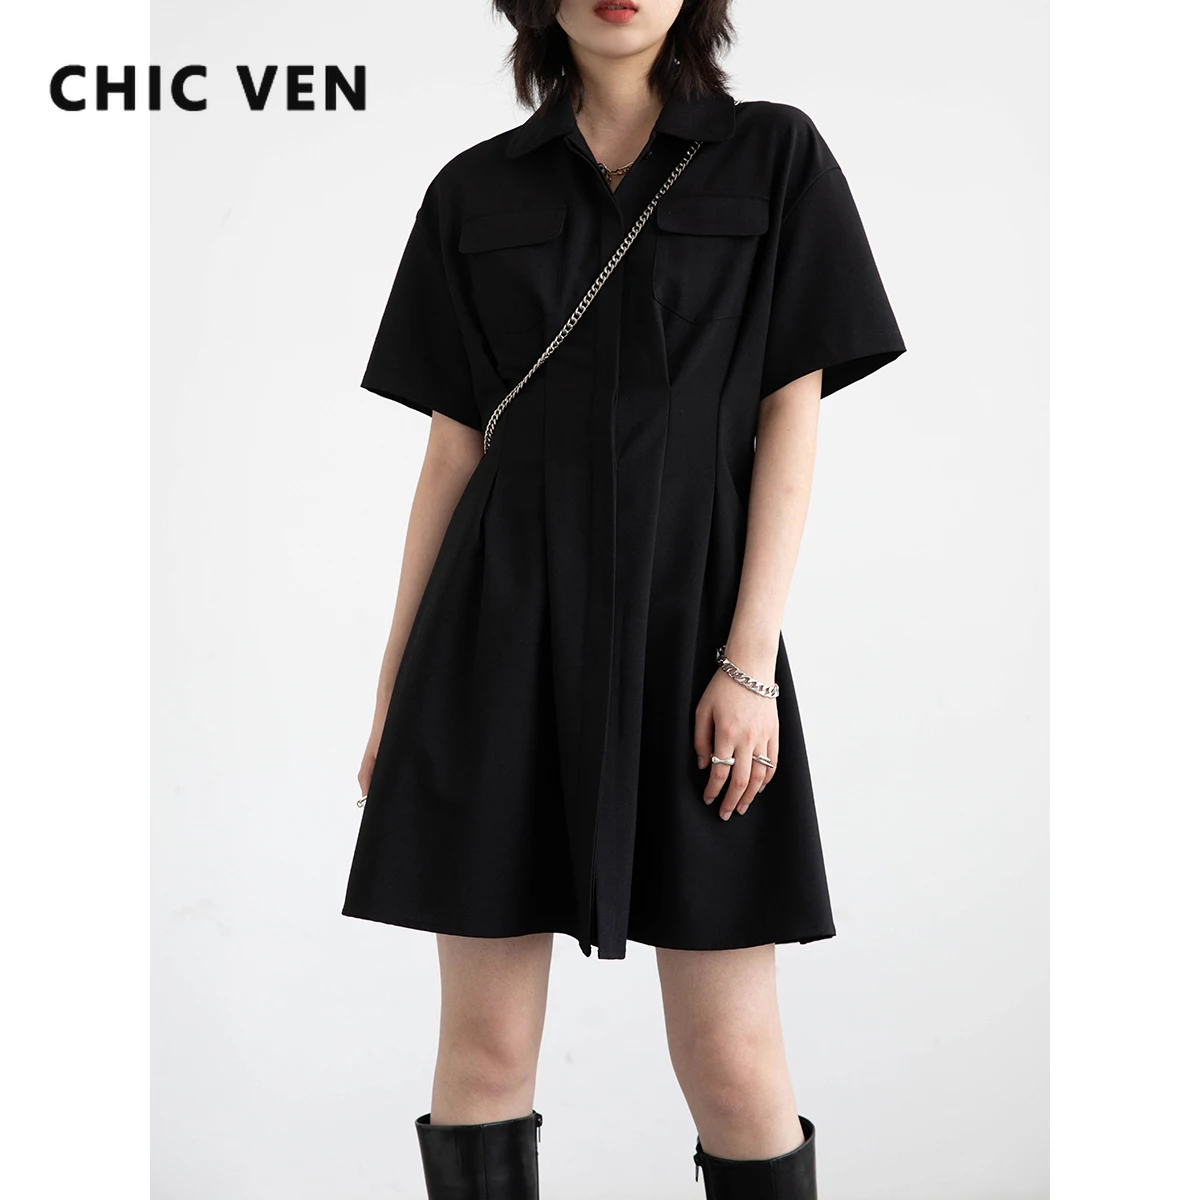 CHIC VEN Women's Dresses Black Solid Short Sleeve A-LINE Casual Lapel Shirt Dress for Women Cloth Office Lady Spring Summer 2022